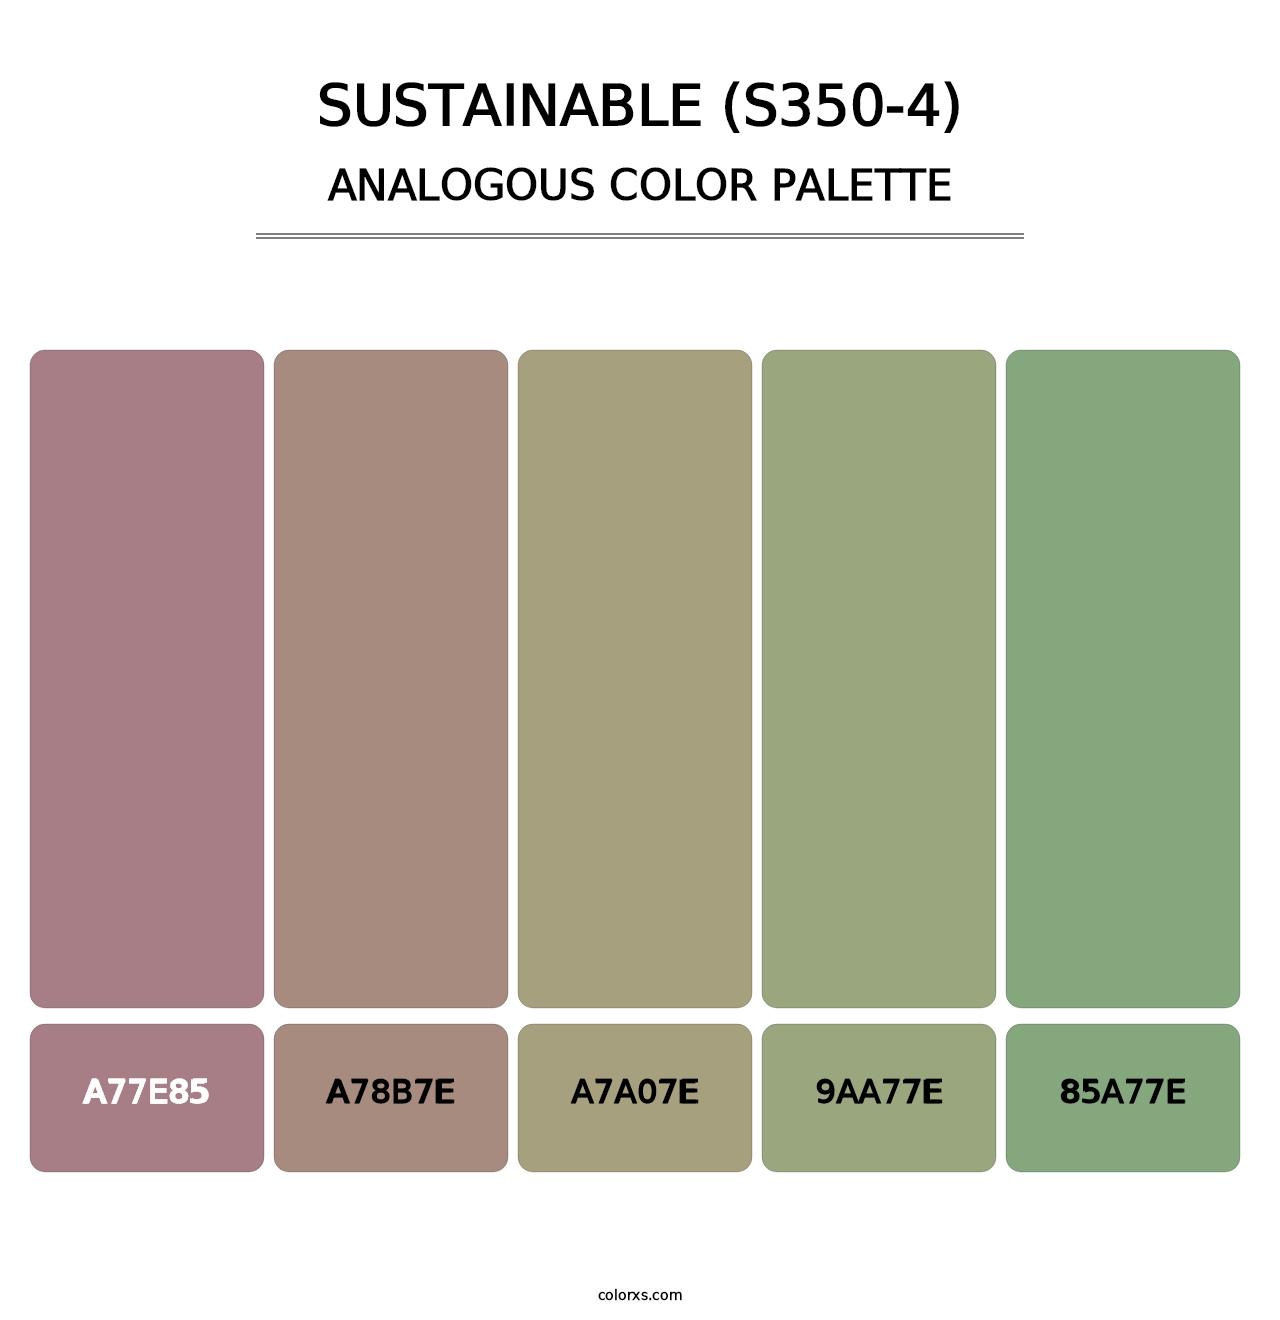 Sustainable (S350-4) - Analogous Color Palette